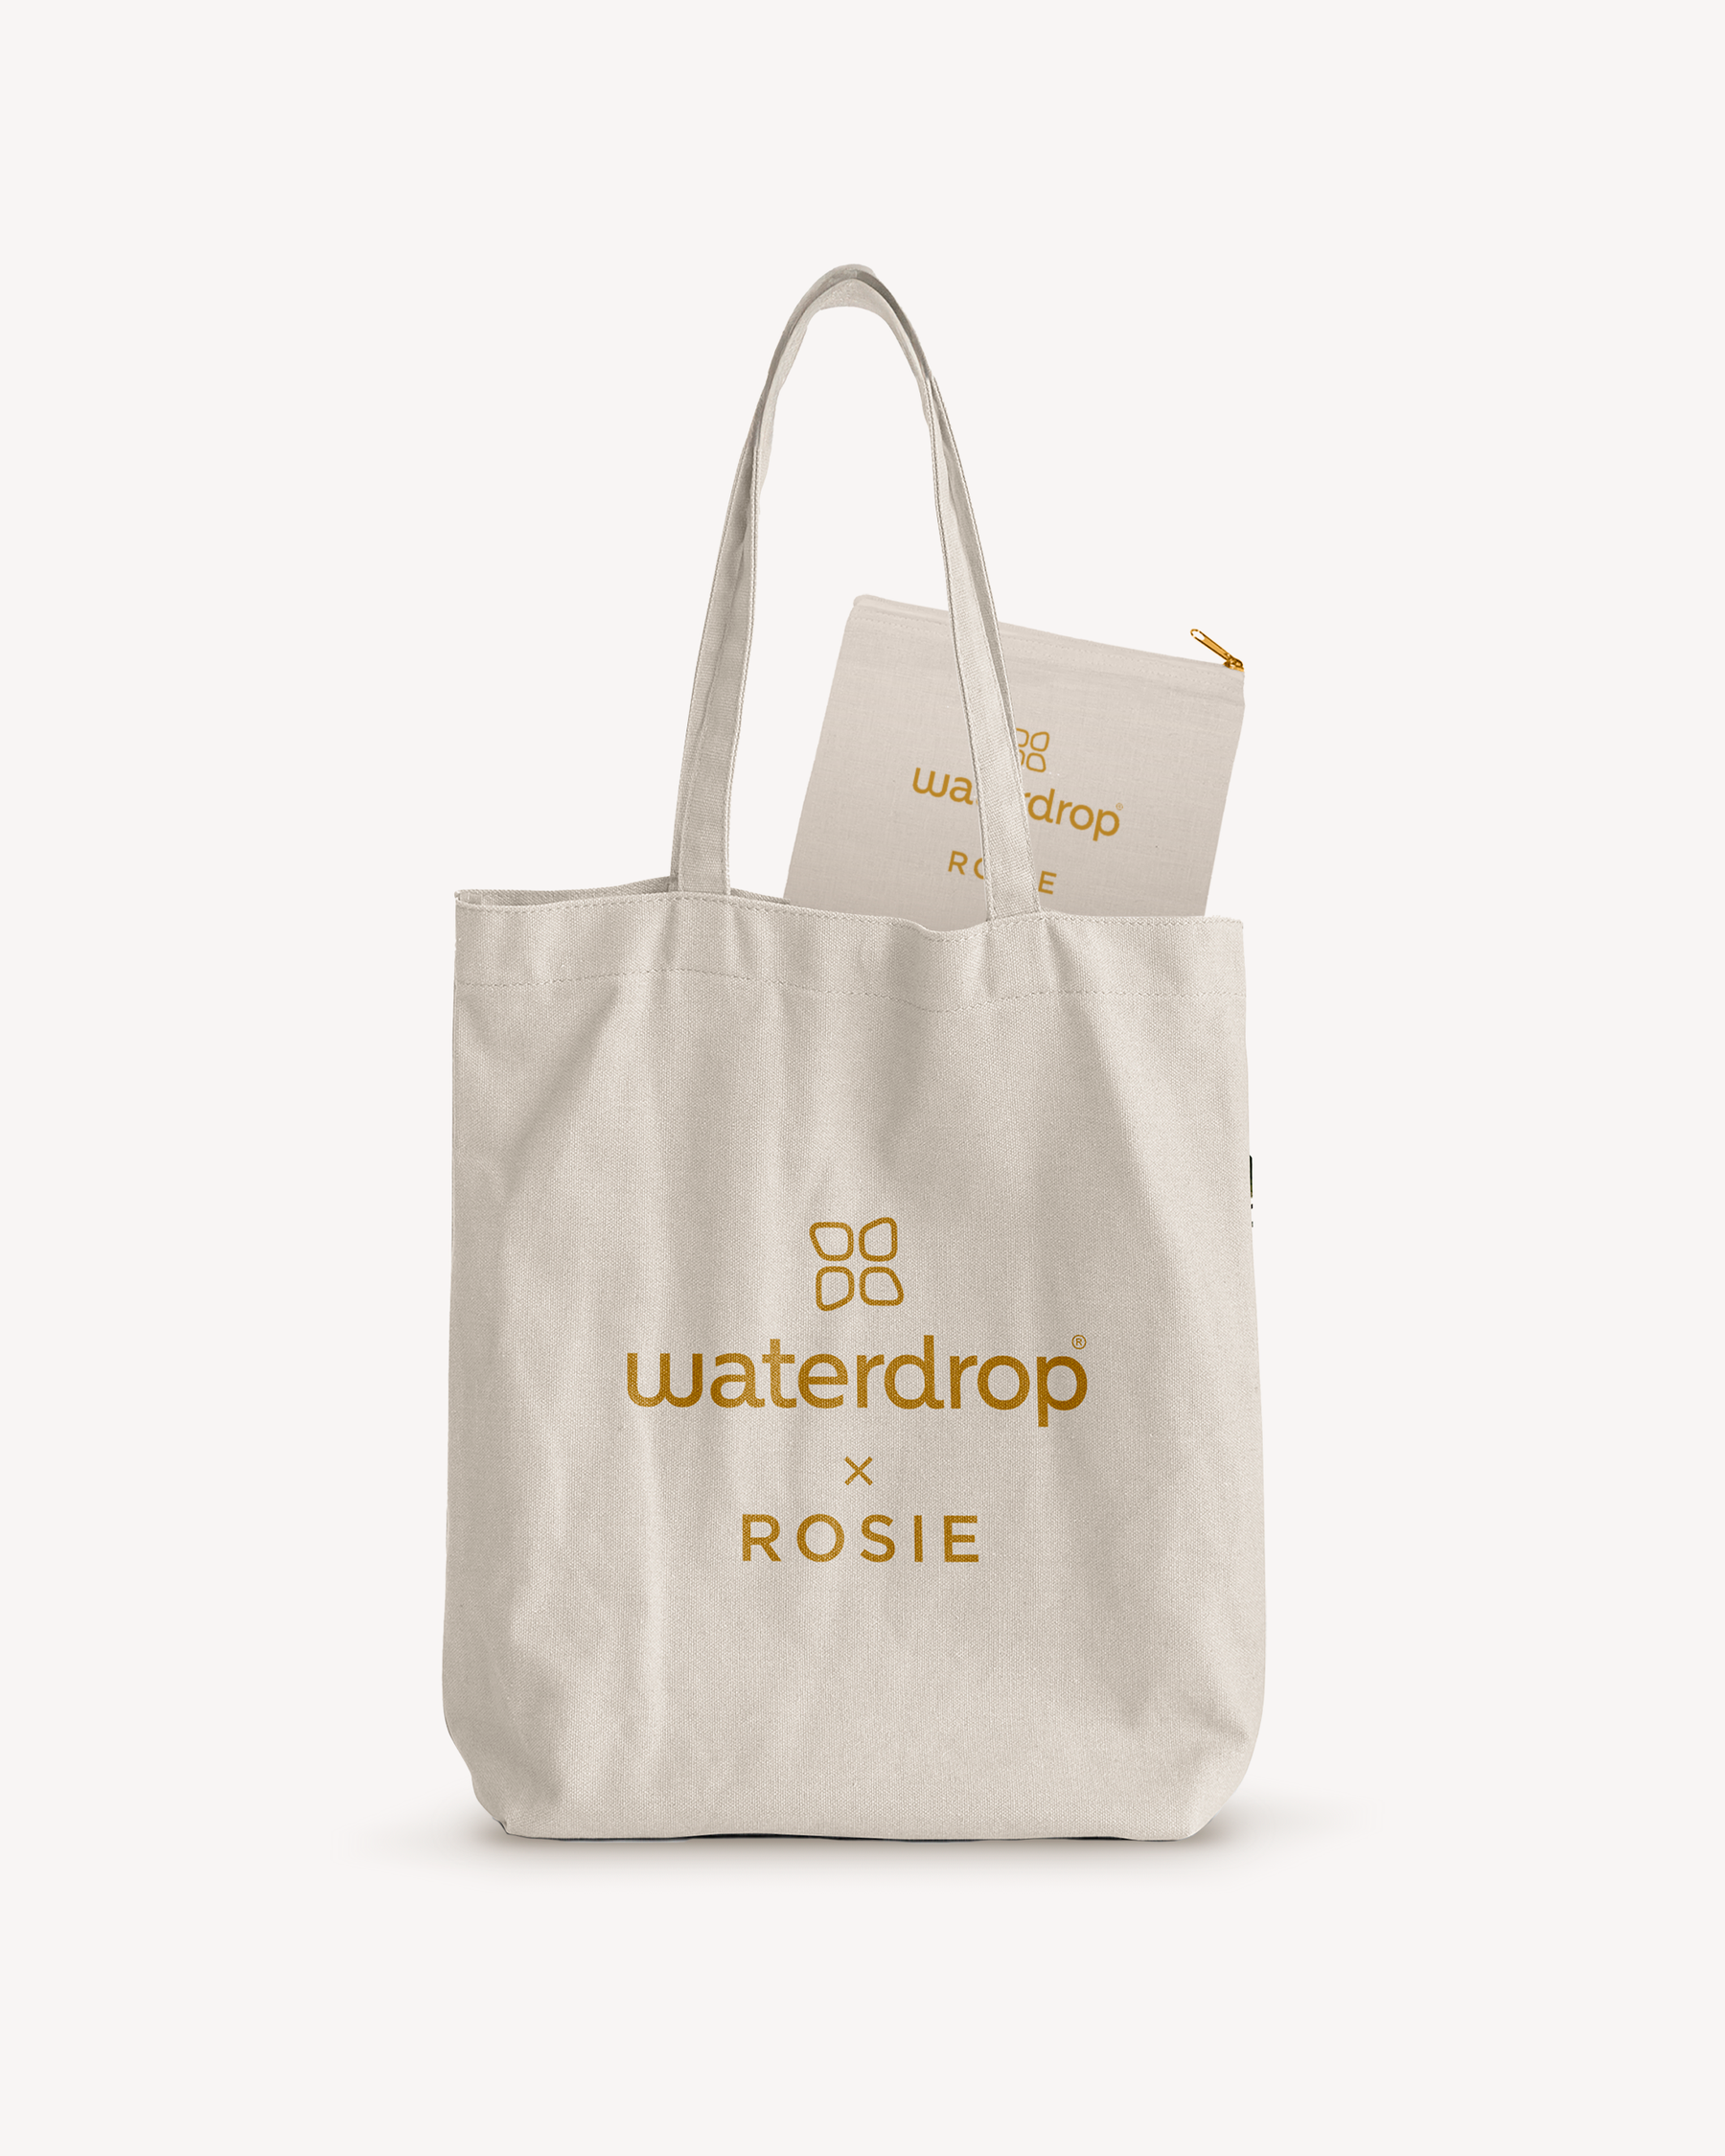 Apple gave away this tote bag to the store visitors at the launch